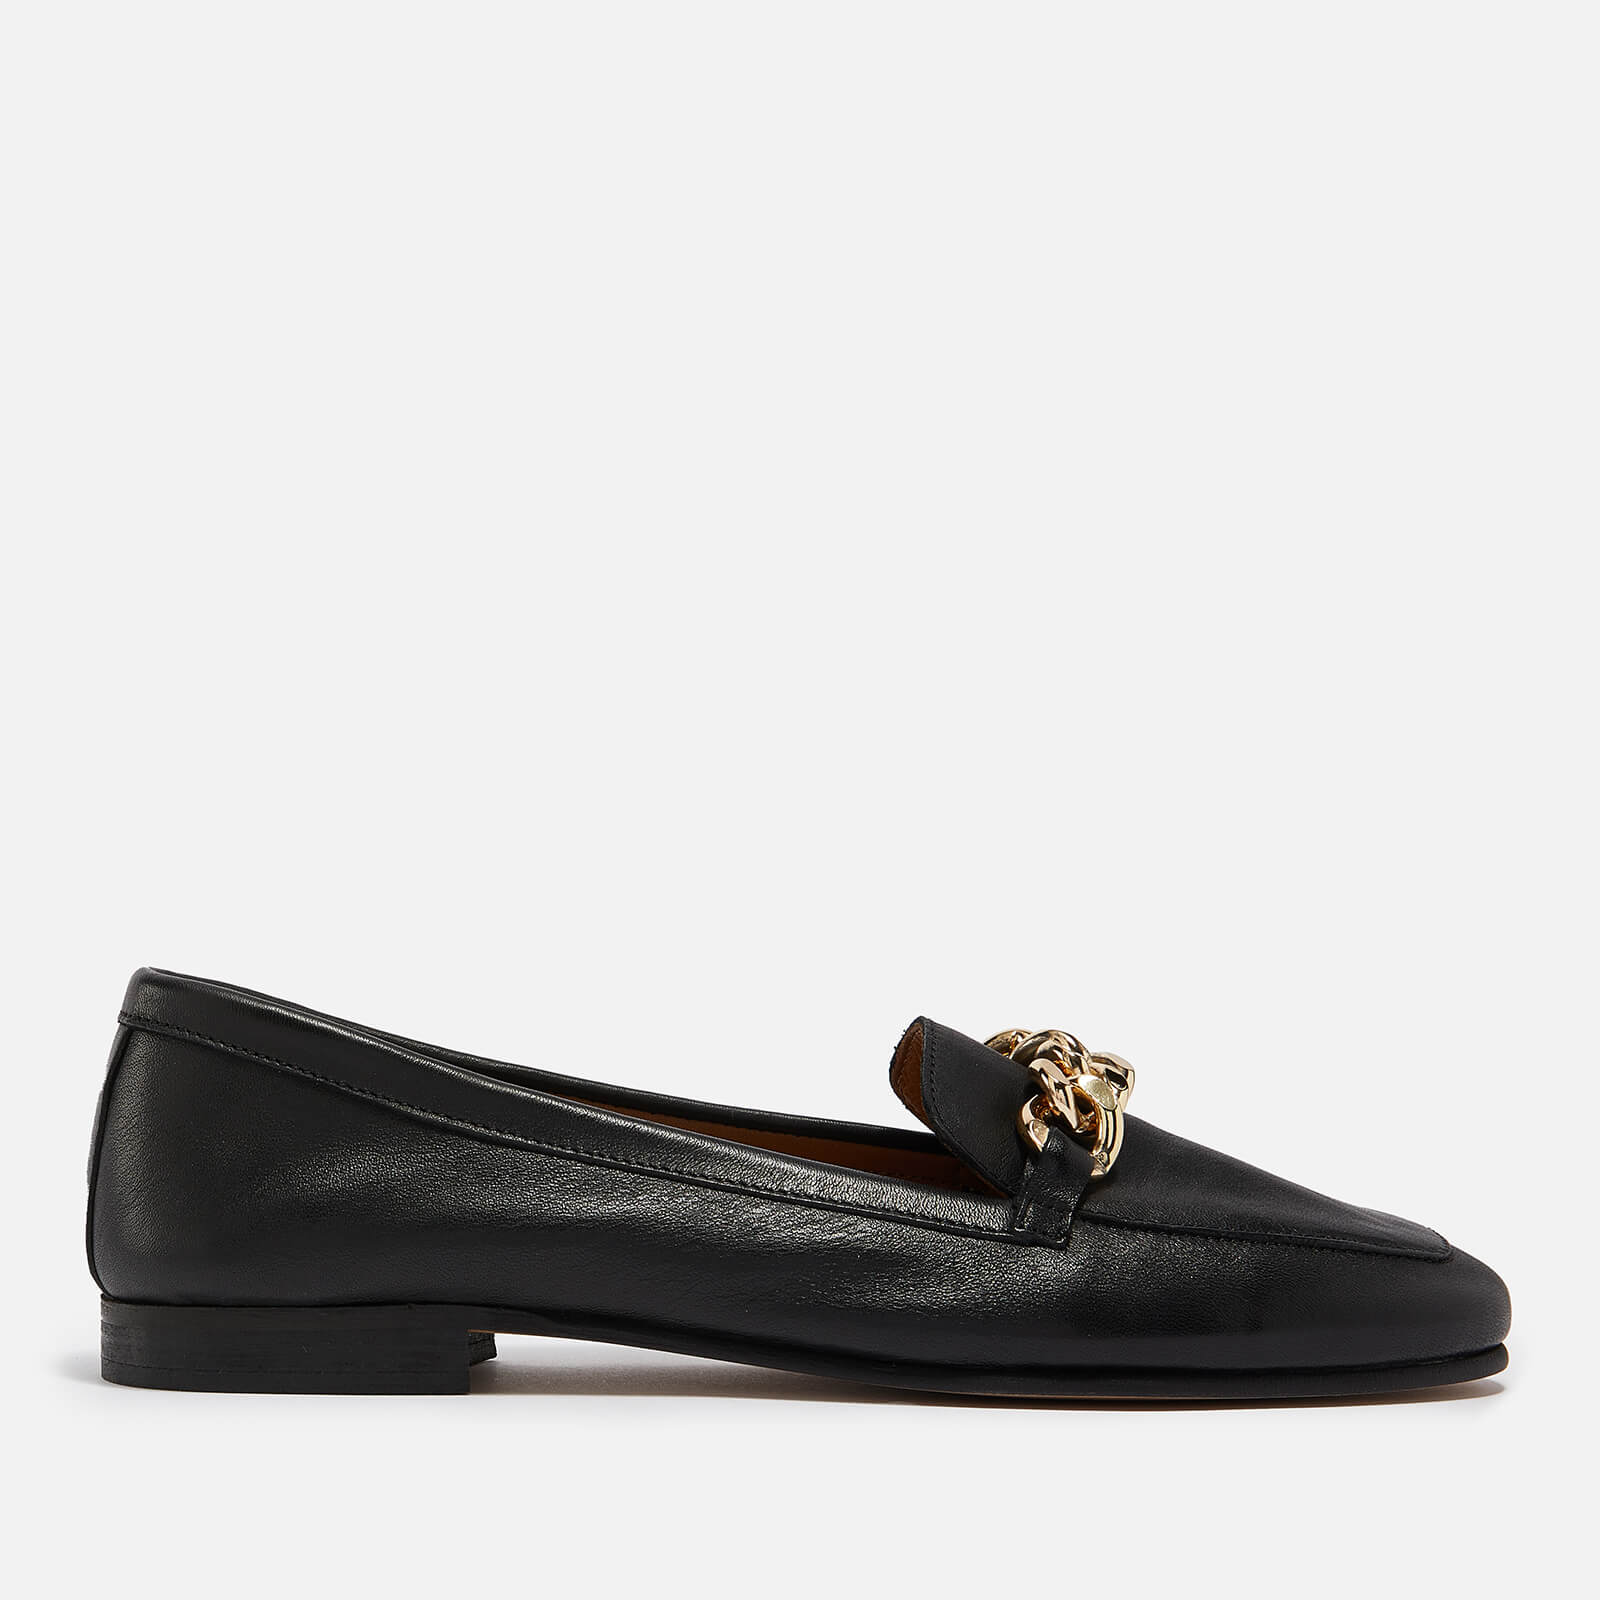 Dune Women's Goldsmith Chain-Embellished Leather Loafers